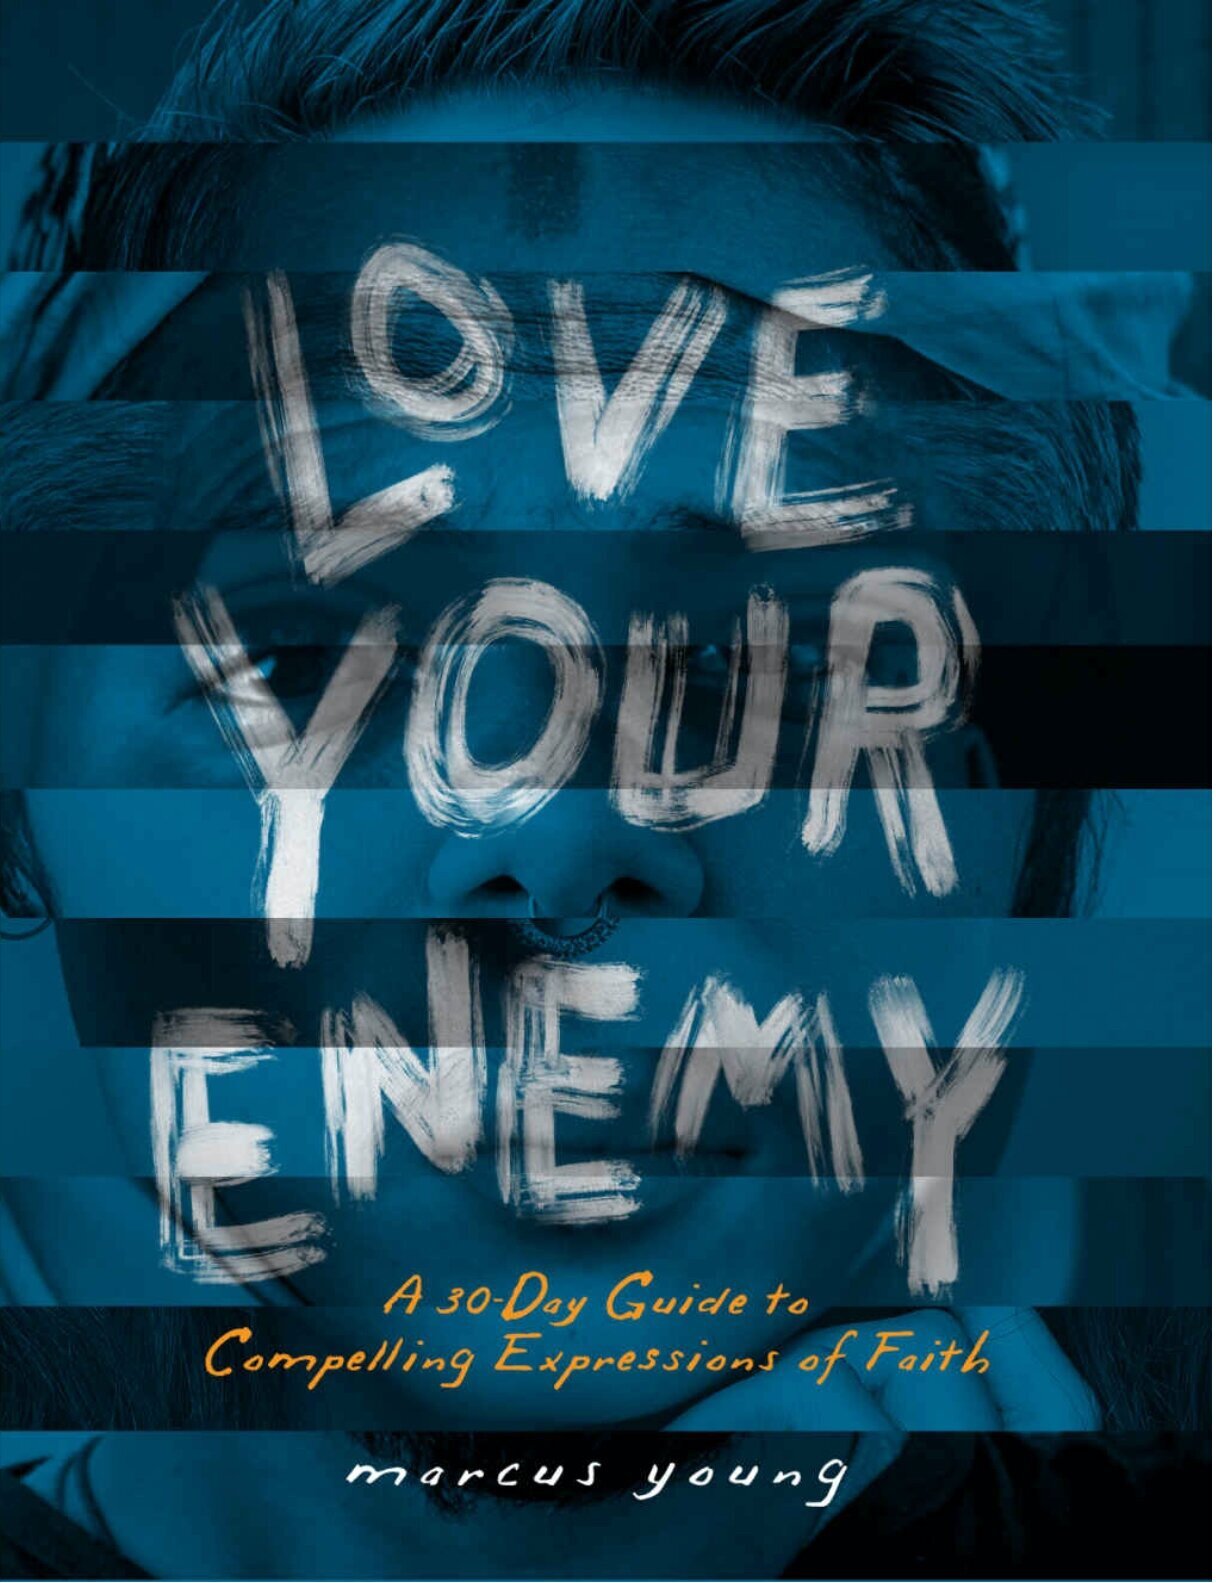 If racism concerns you, learn to love enemies in every context: https://amzn.to/358Iv62